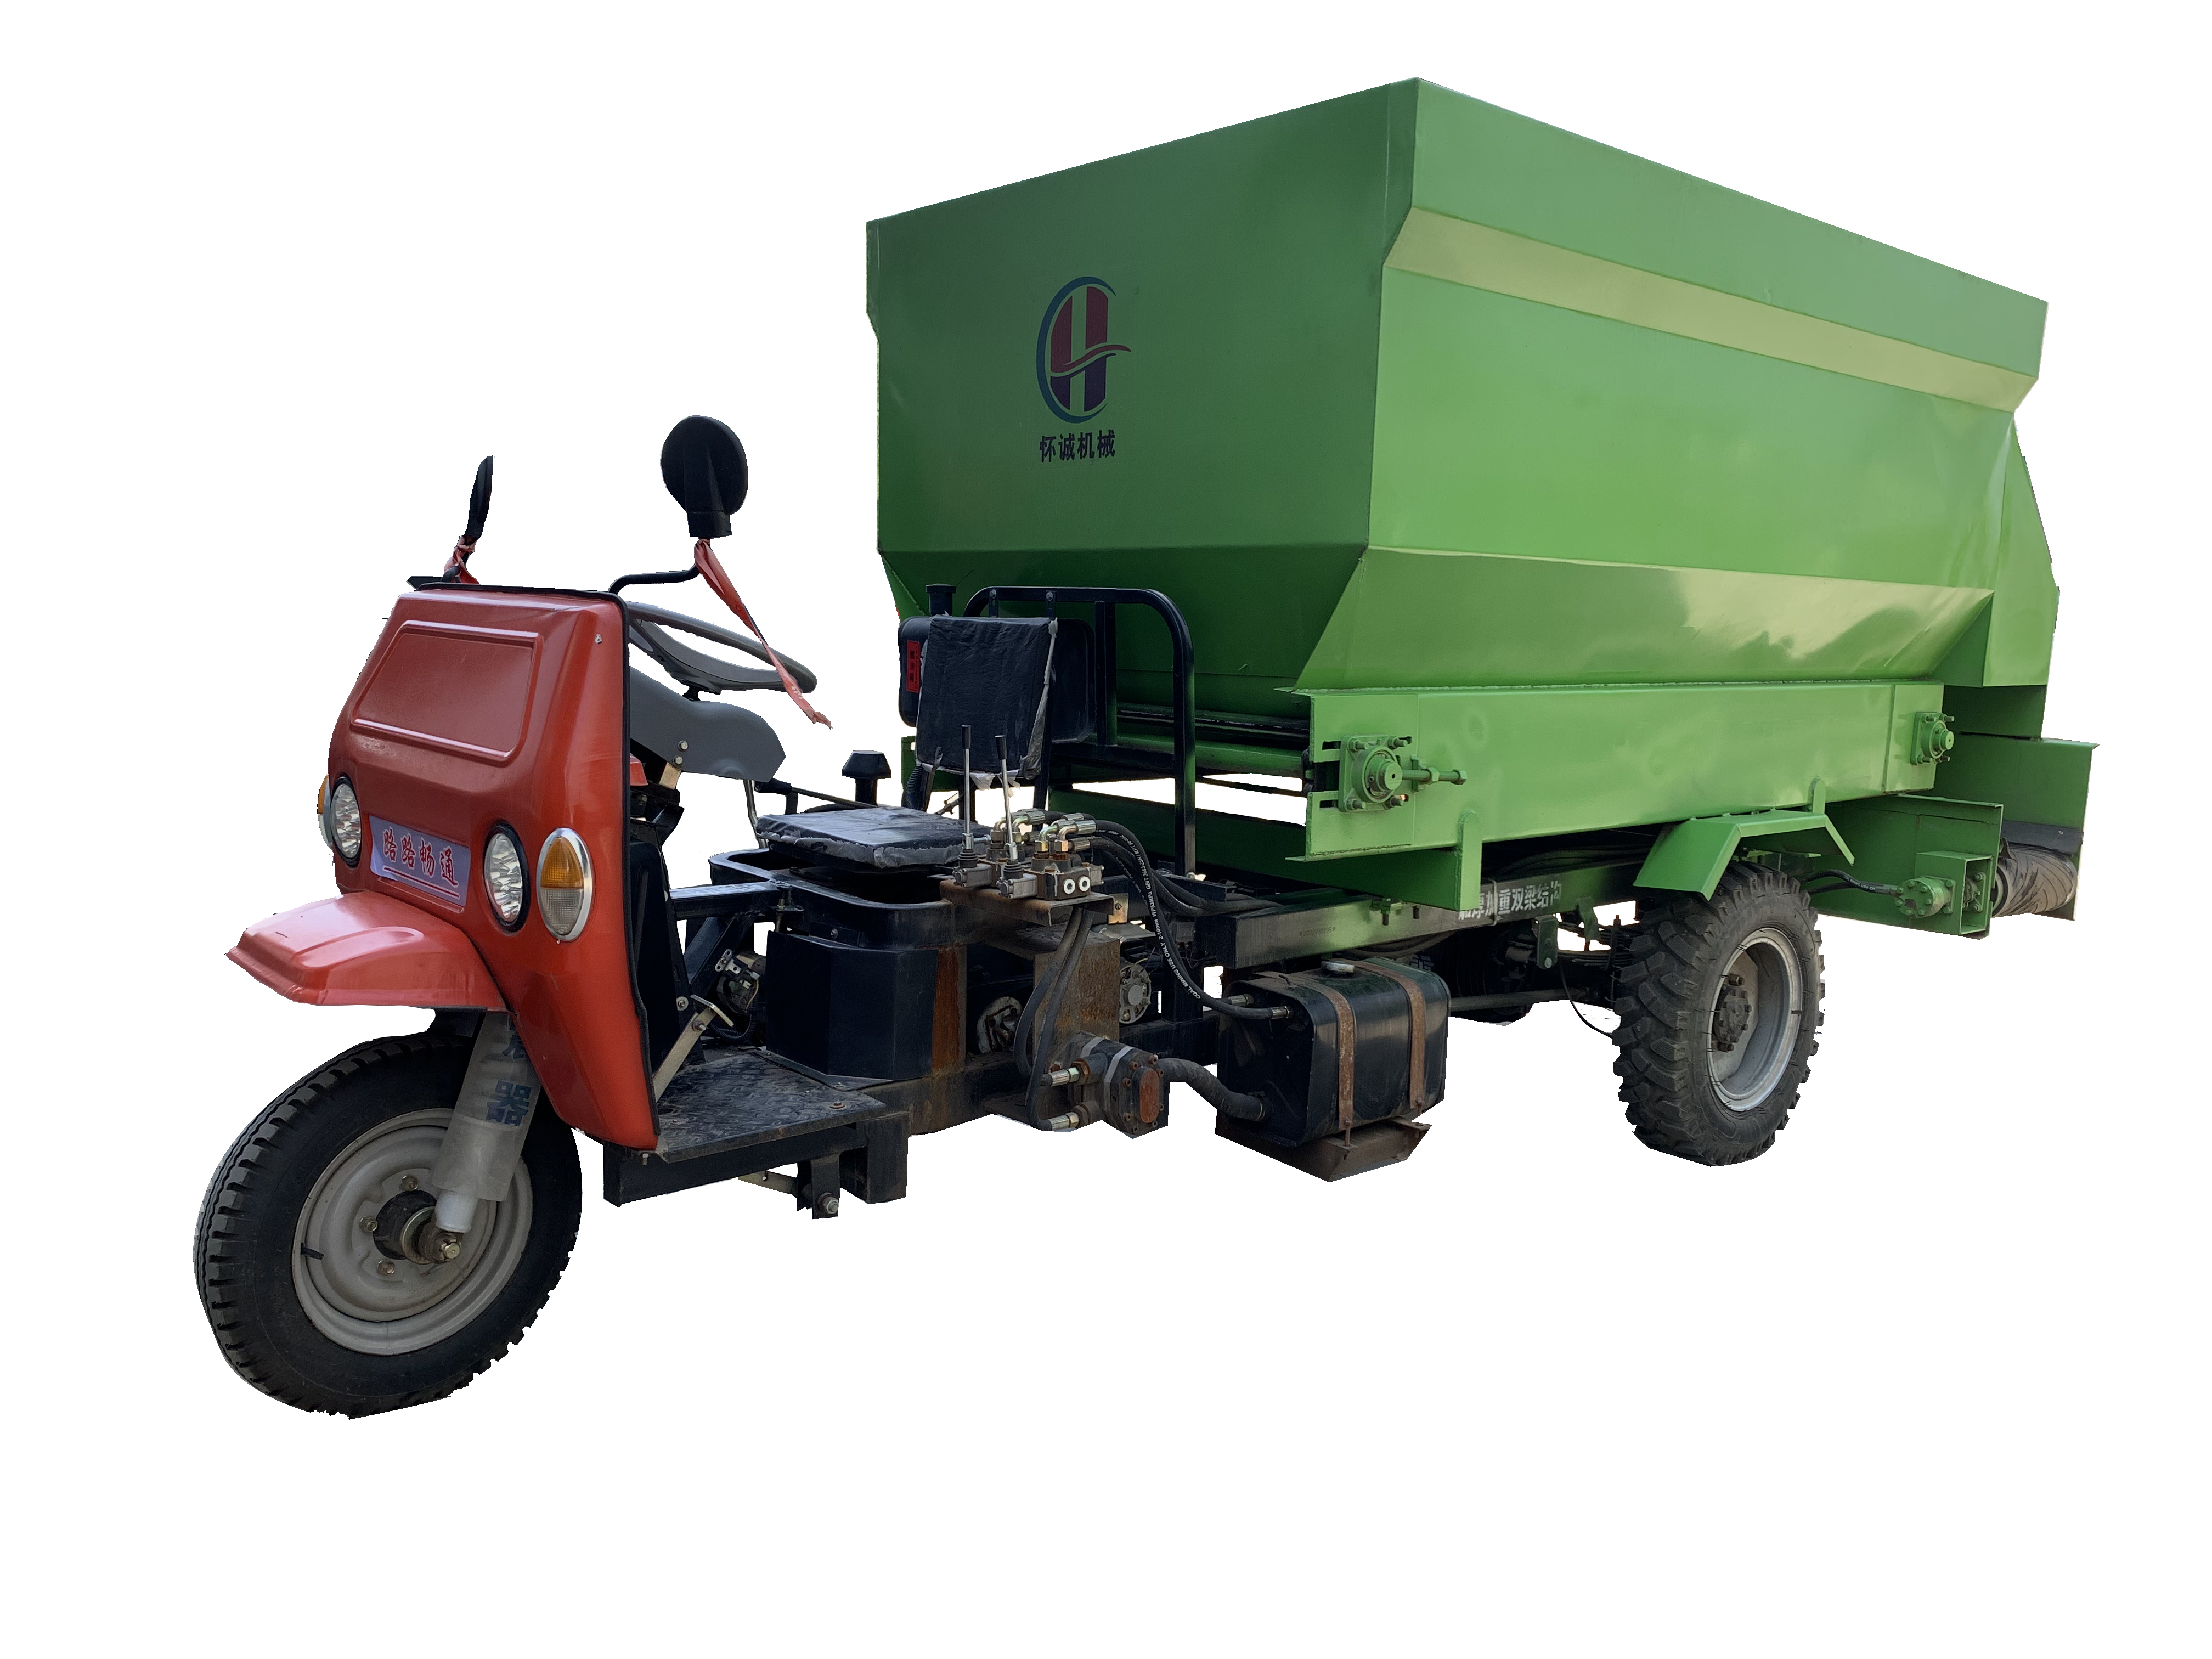 The role of diesel spreader